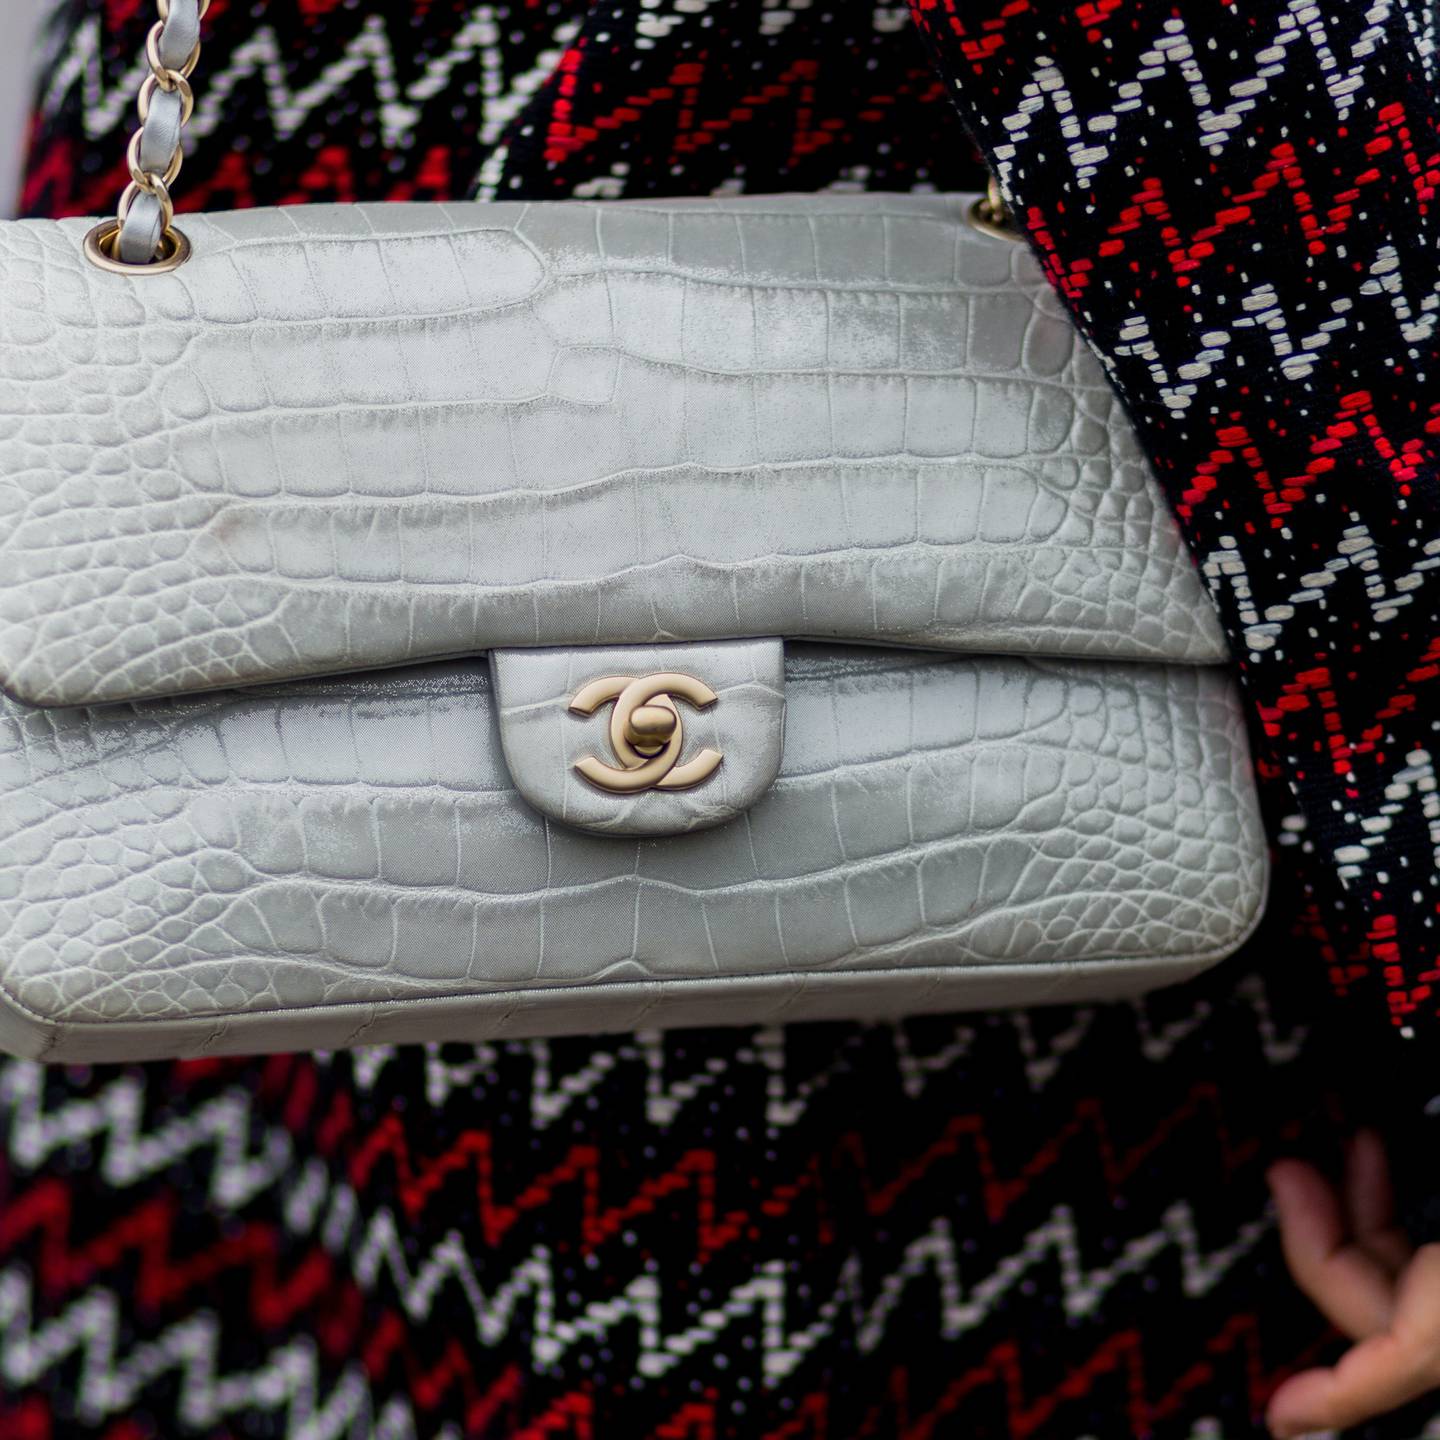 Op-Ed | Why Chanel's Exotic Skins Ban Is Wrong | BoF